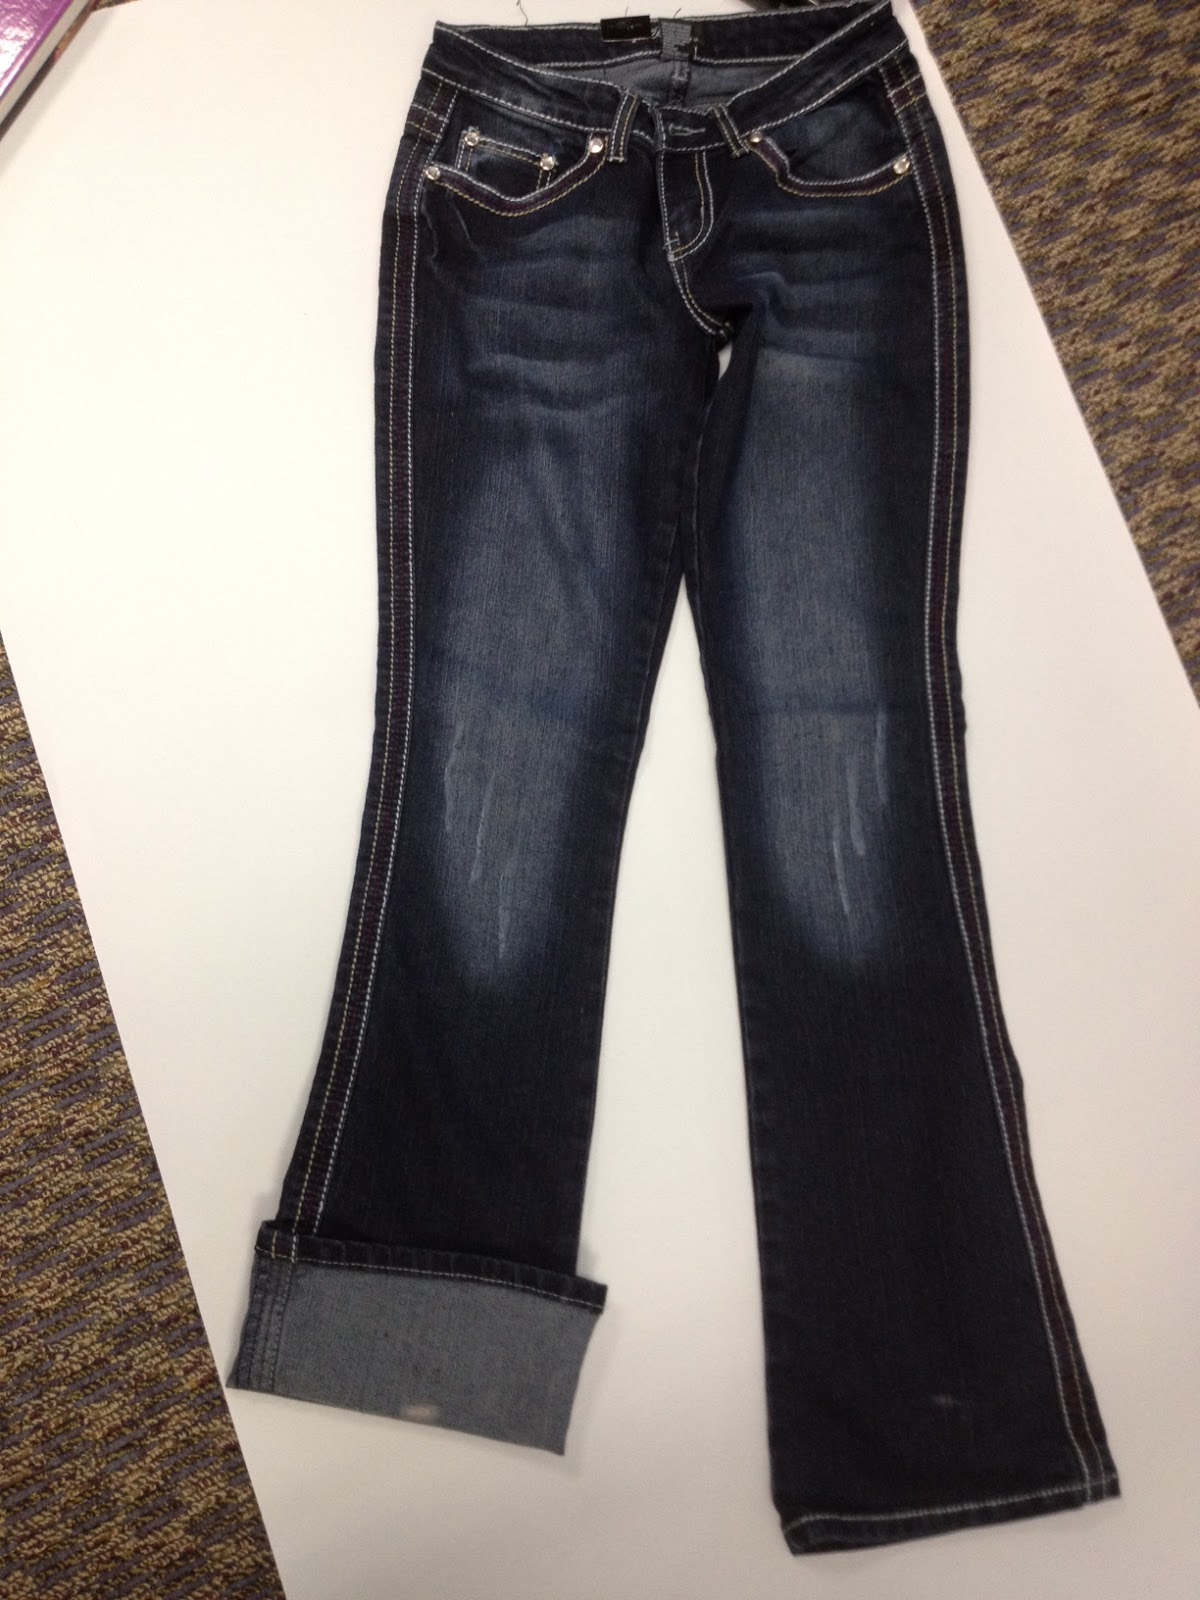 Sewing Secrets: The Long & Short of Hemming Jeans